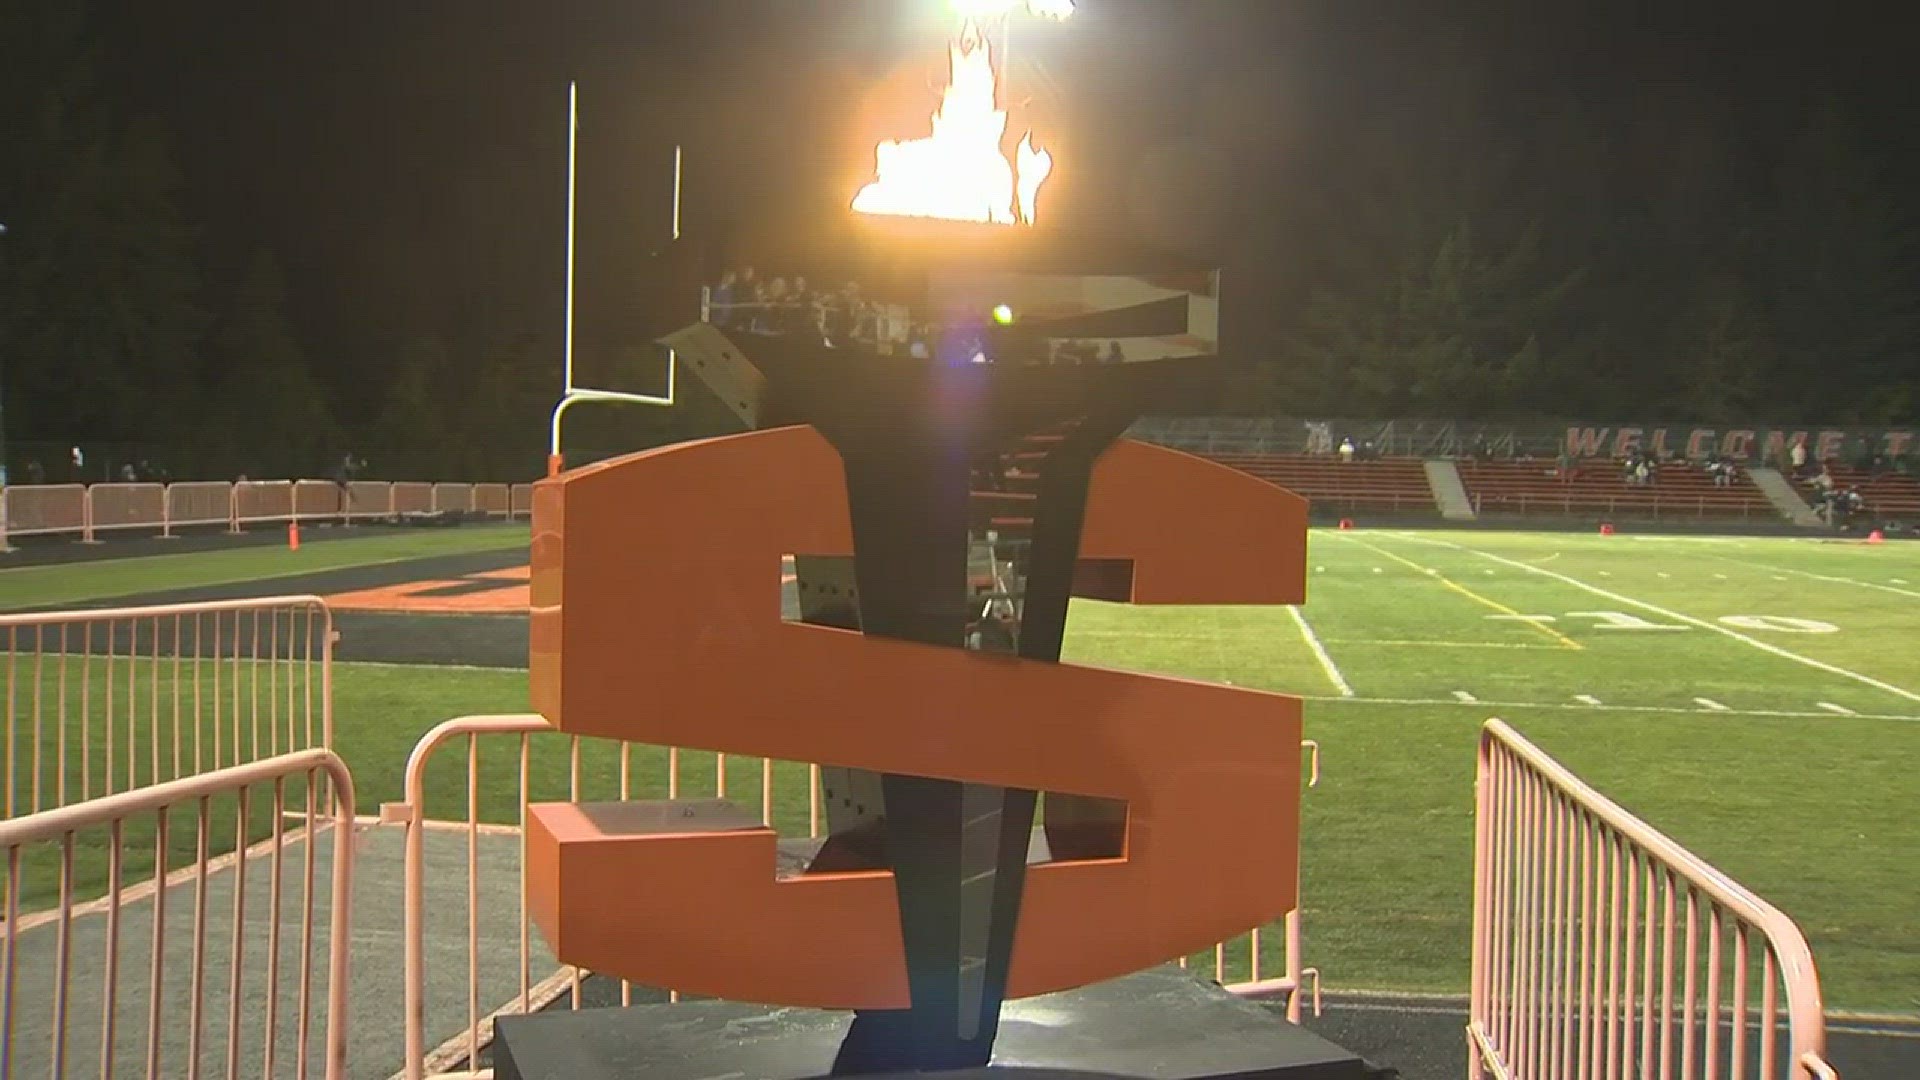 Highlights from No. 8 Sprague's 57-14 win over No. 25 Southridge in the first round of the playoffs on Nov. 3, 2017.